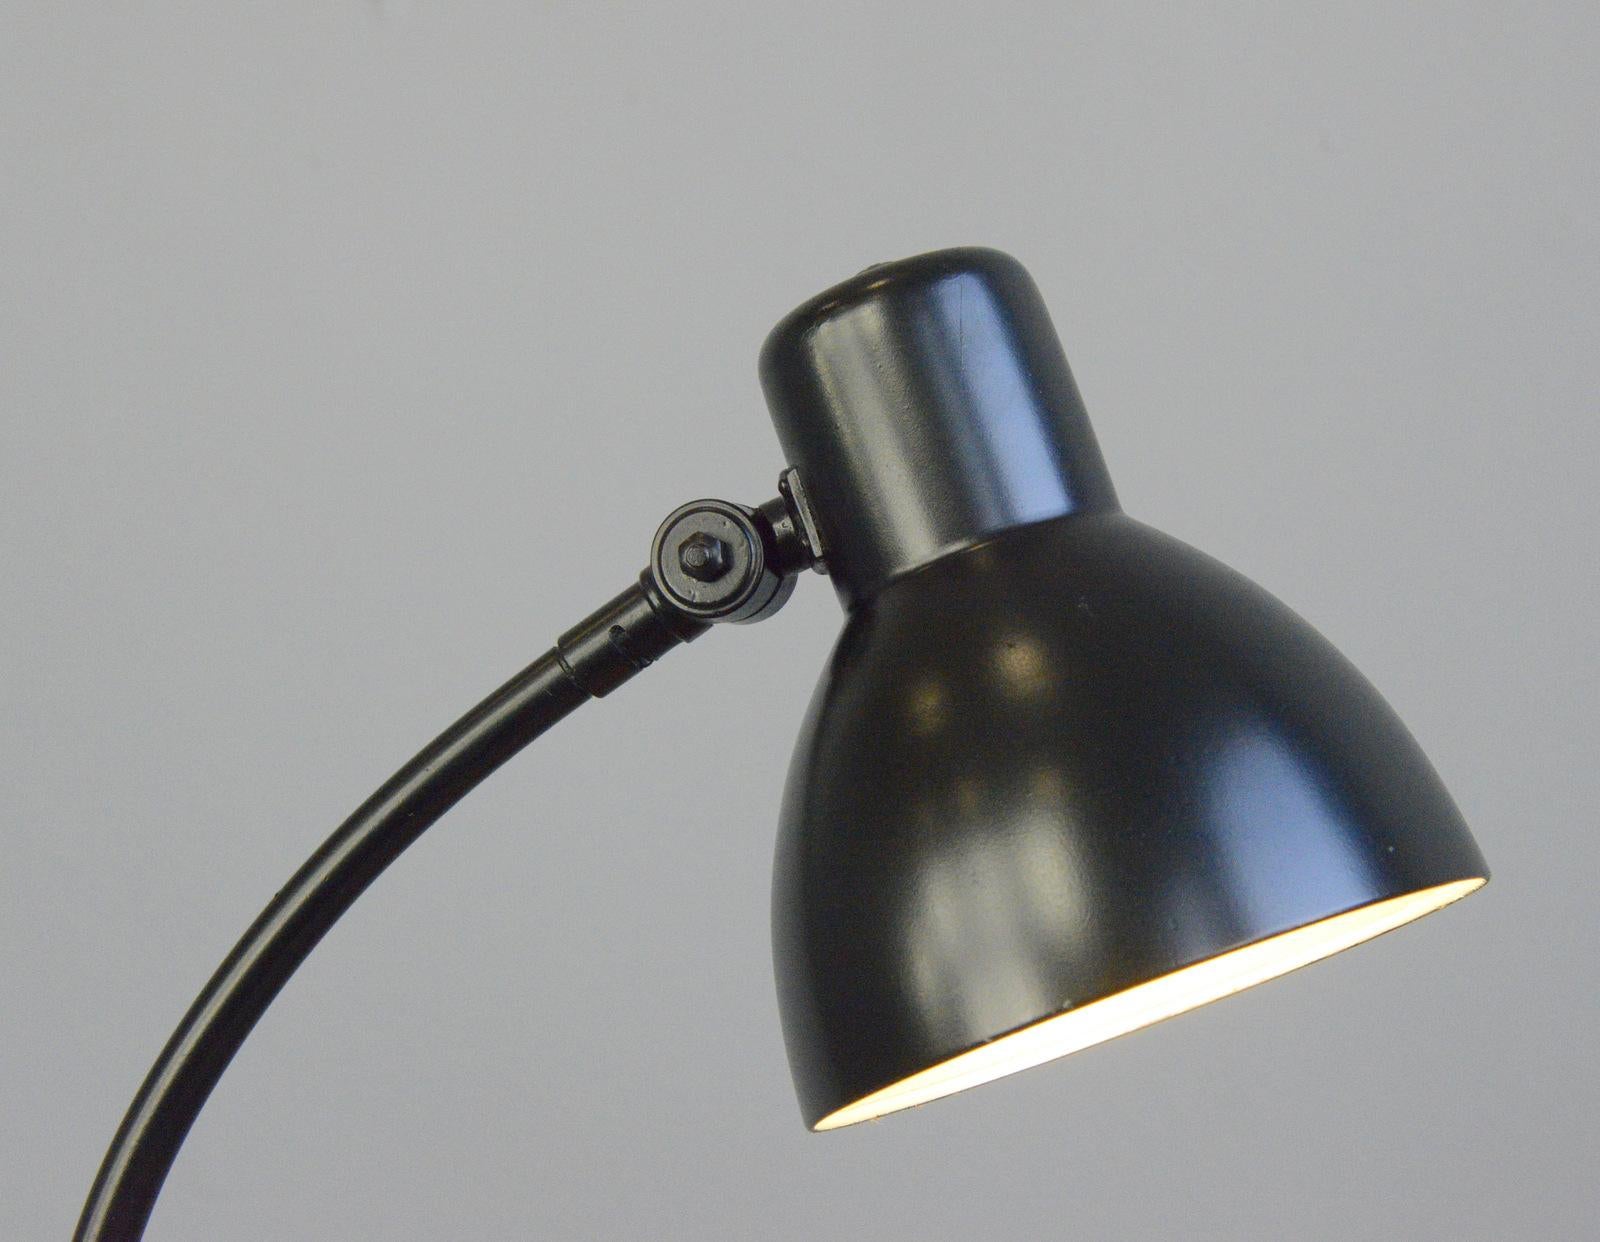 Kandem model 1087 DRG table lamp, circa 1930s

- Cast iron base
- Curved adjustable arm
- Adjustable shade
- Takes E27 fitting bulbs
- On/Off switch on the base
- Designed by Hin Bredendieck at The Bauhaus, Dessau
- Produced between